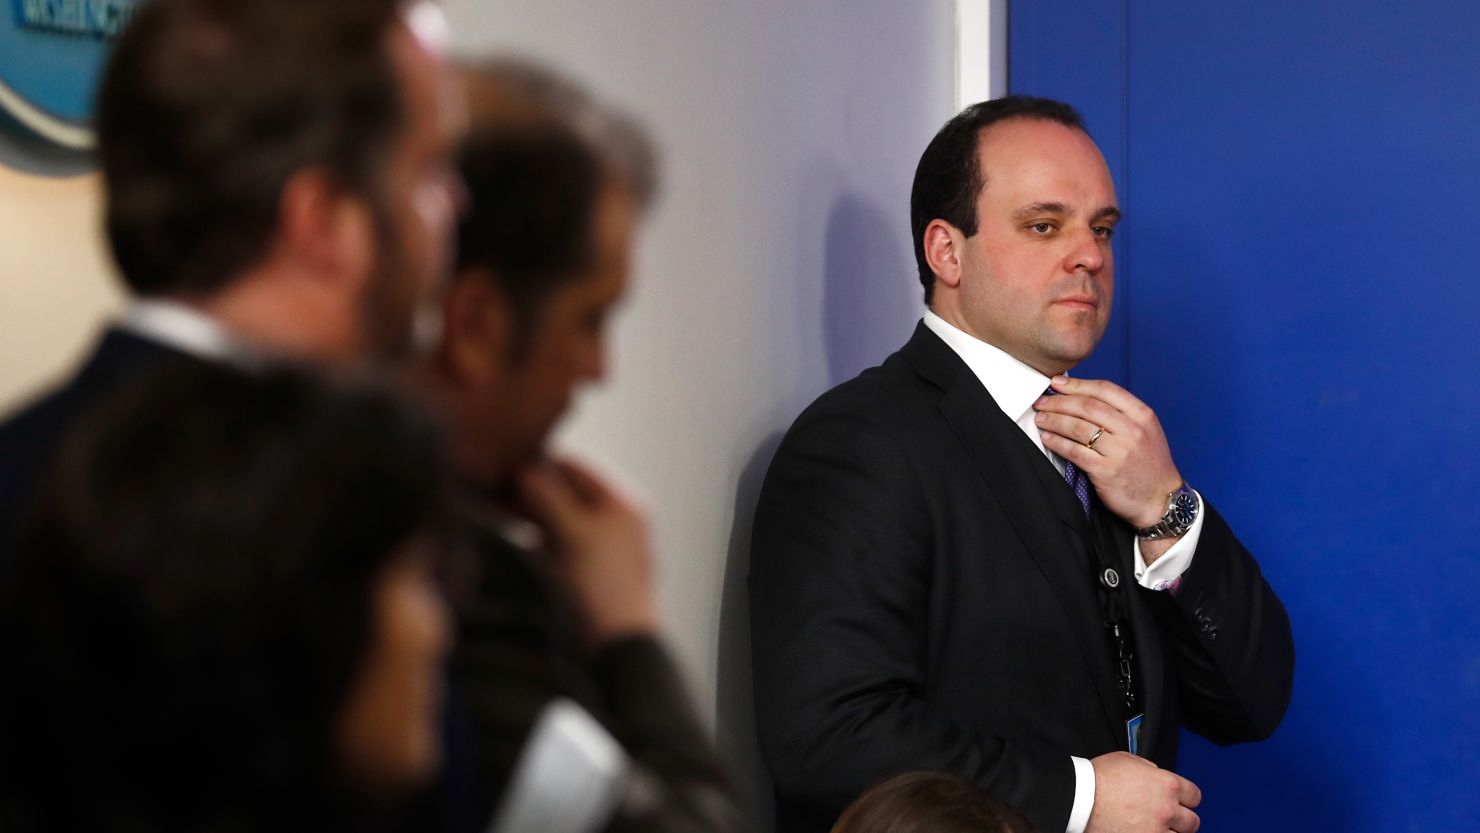 Boris Epshteyn stands to the side of the briefing room as White House press secretary Sean Spicer speaks during the daily news briefing at the White House, in Washington, Tuesday, Feb. 7, 2017. (AP Photo/Carolyn Kaster)